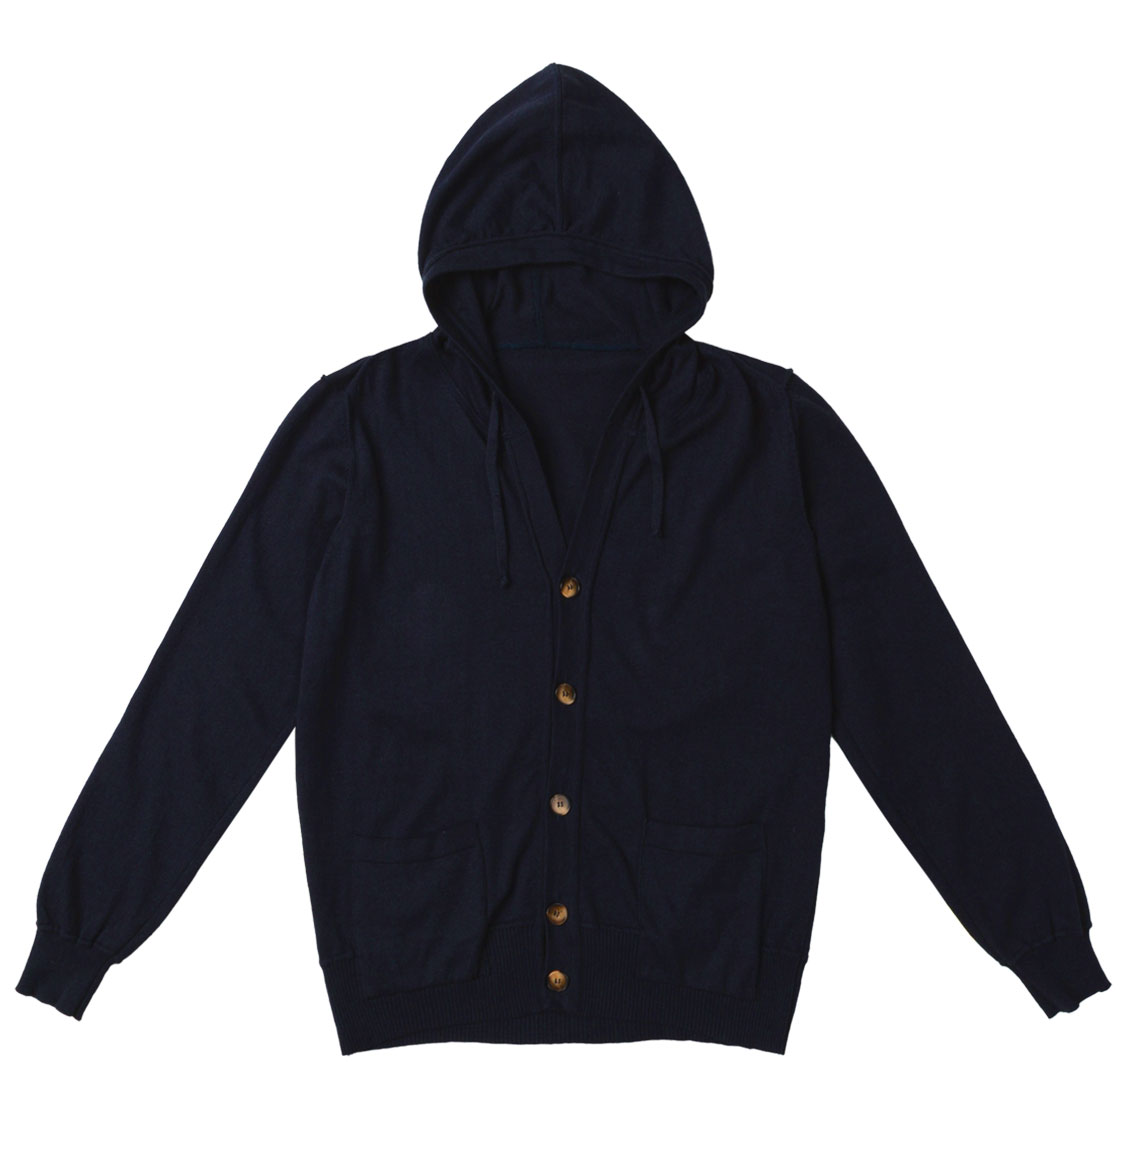 The Project Garments Cotton Blend Knitted Hooded Sweater Navy Blue